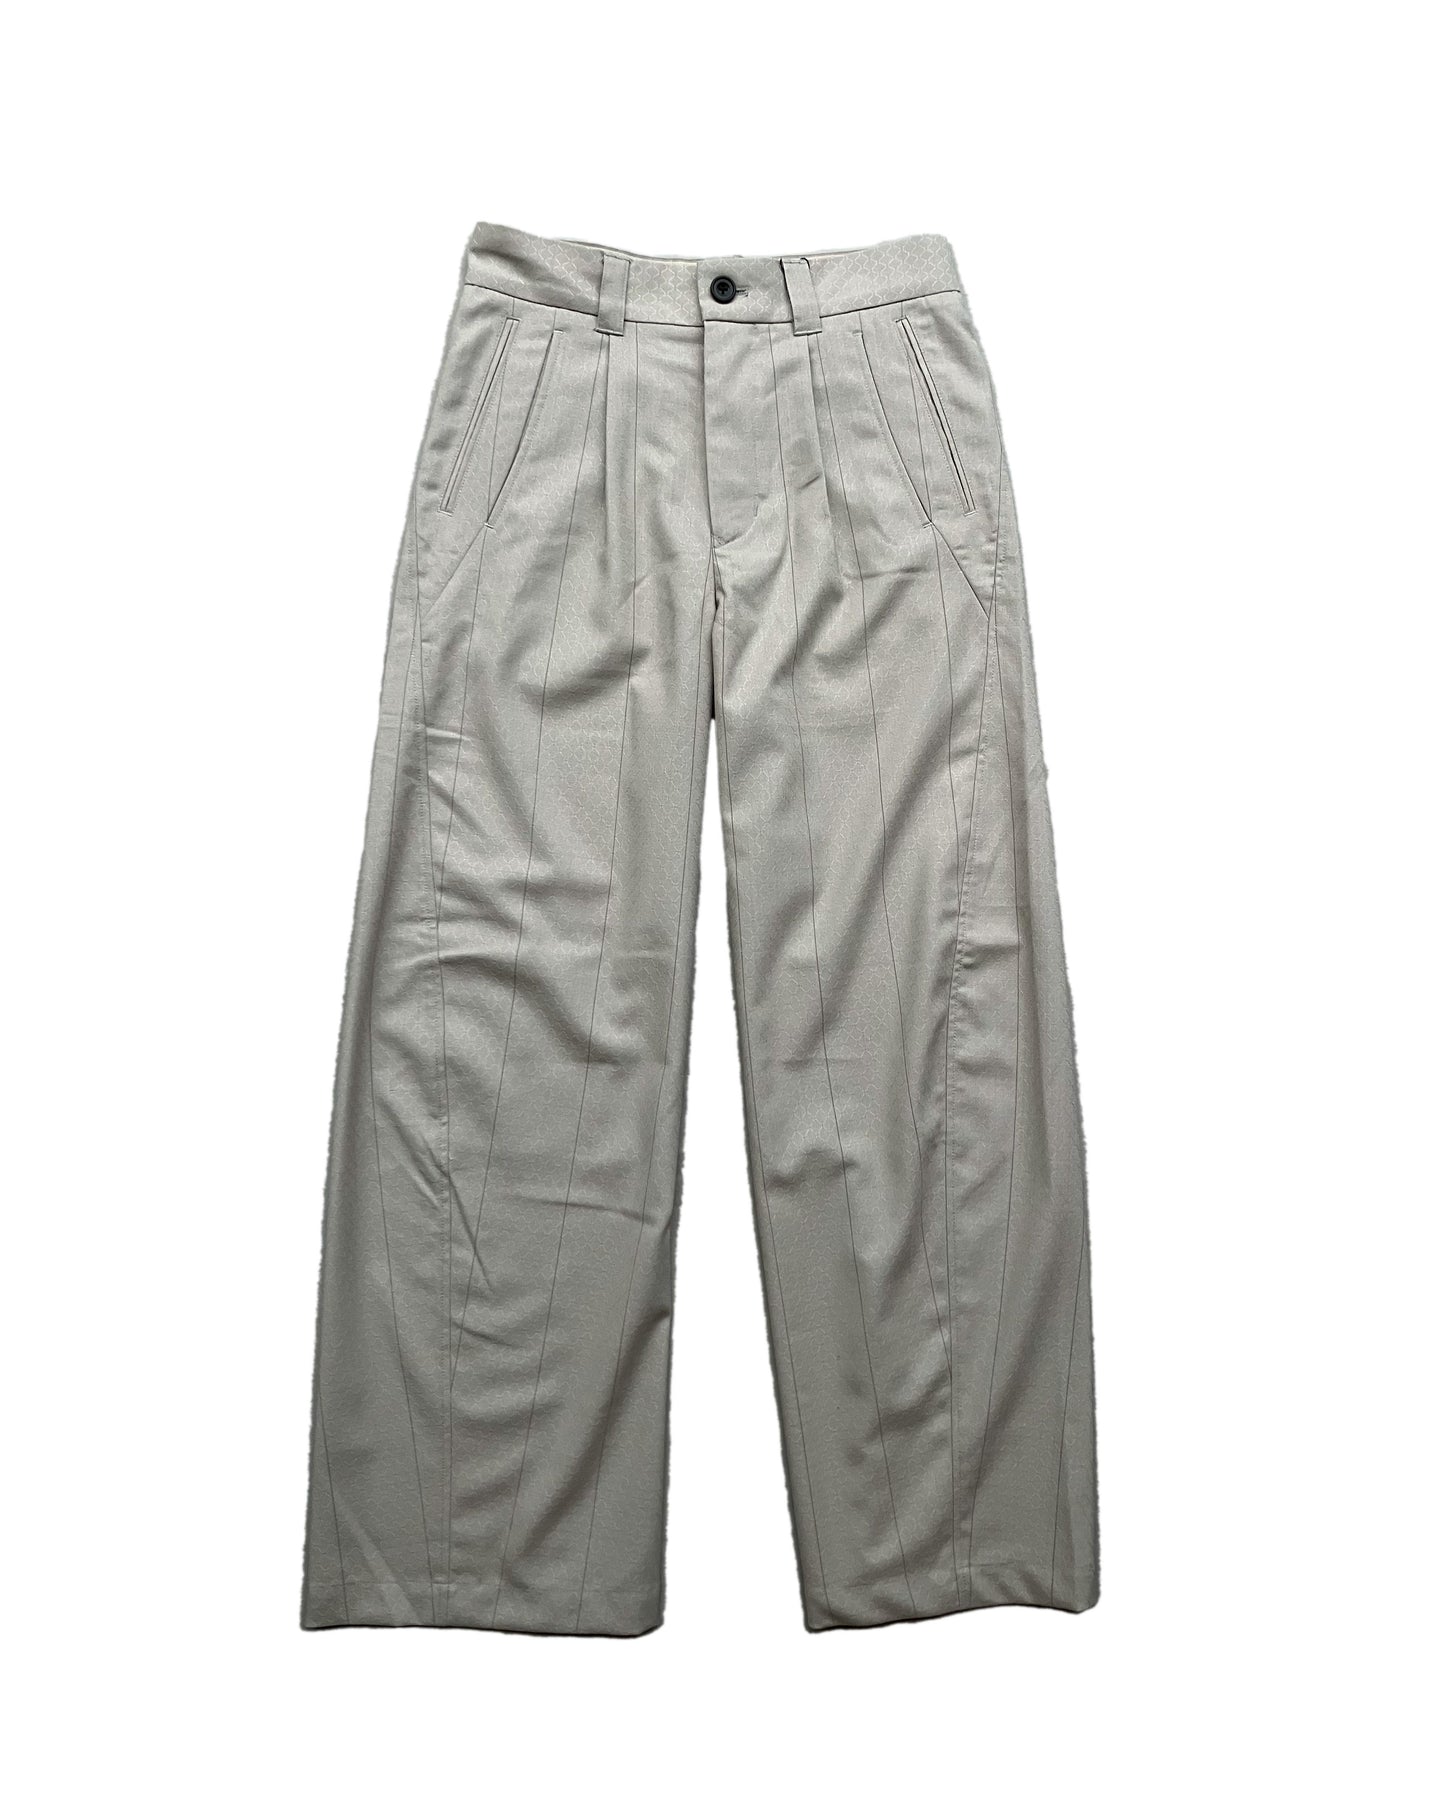 Call - CL_AW23_PT_02 / 3D WIDE TROUSERS - Beige